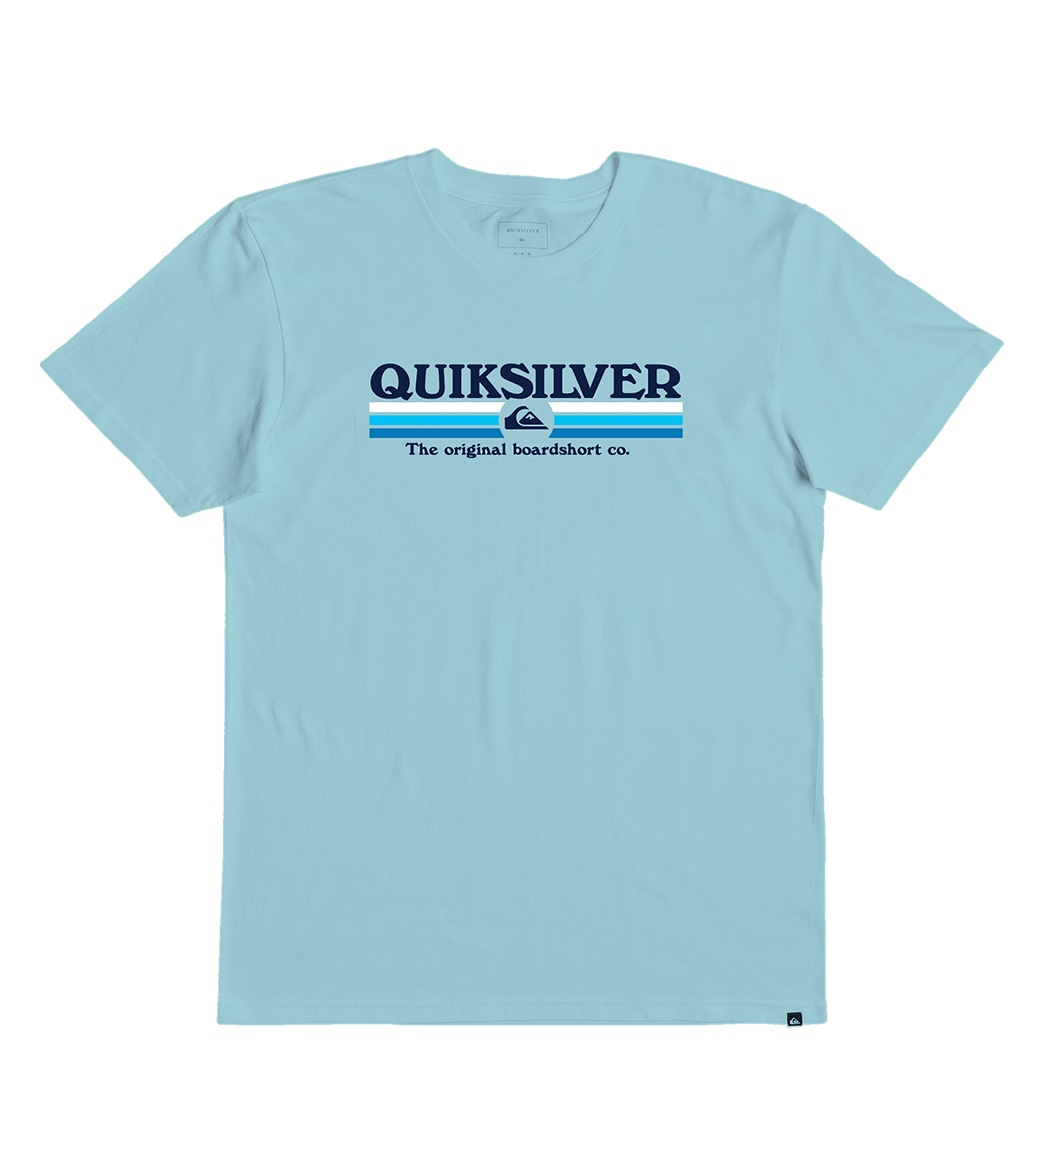 Quiksilver Boys' Lined Up Tee Big Kid Shirt - Angel Blue Large/14 Cotton - Swimoutlet.com